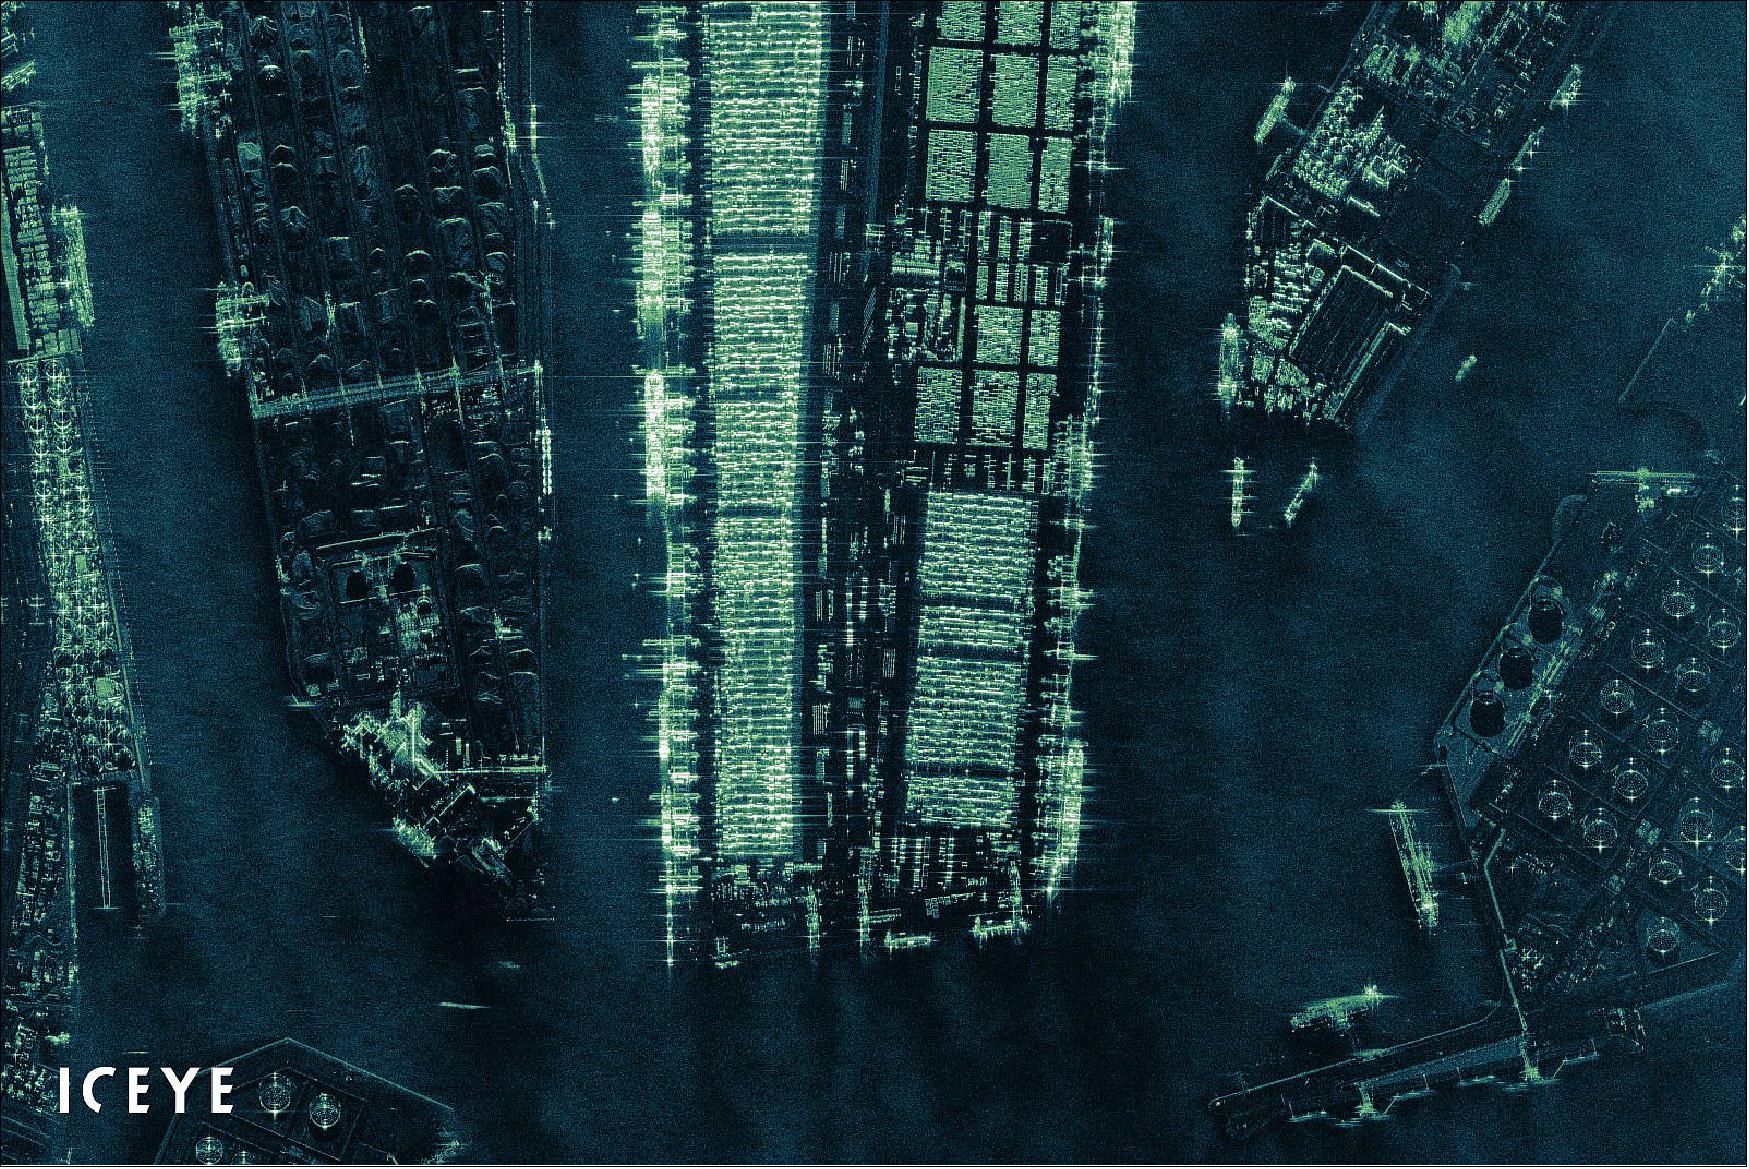 Figure 26: A radar satellite image of the largest seaport in Europe - Port of Rotterdam, the Netherlands. The image was acquired with an ICEYE SAR satellite in the Spot imaging mode (image credit: ICEYE)